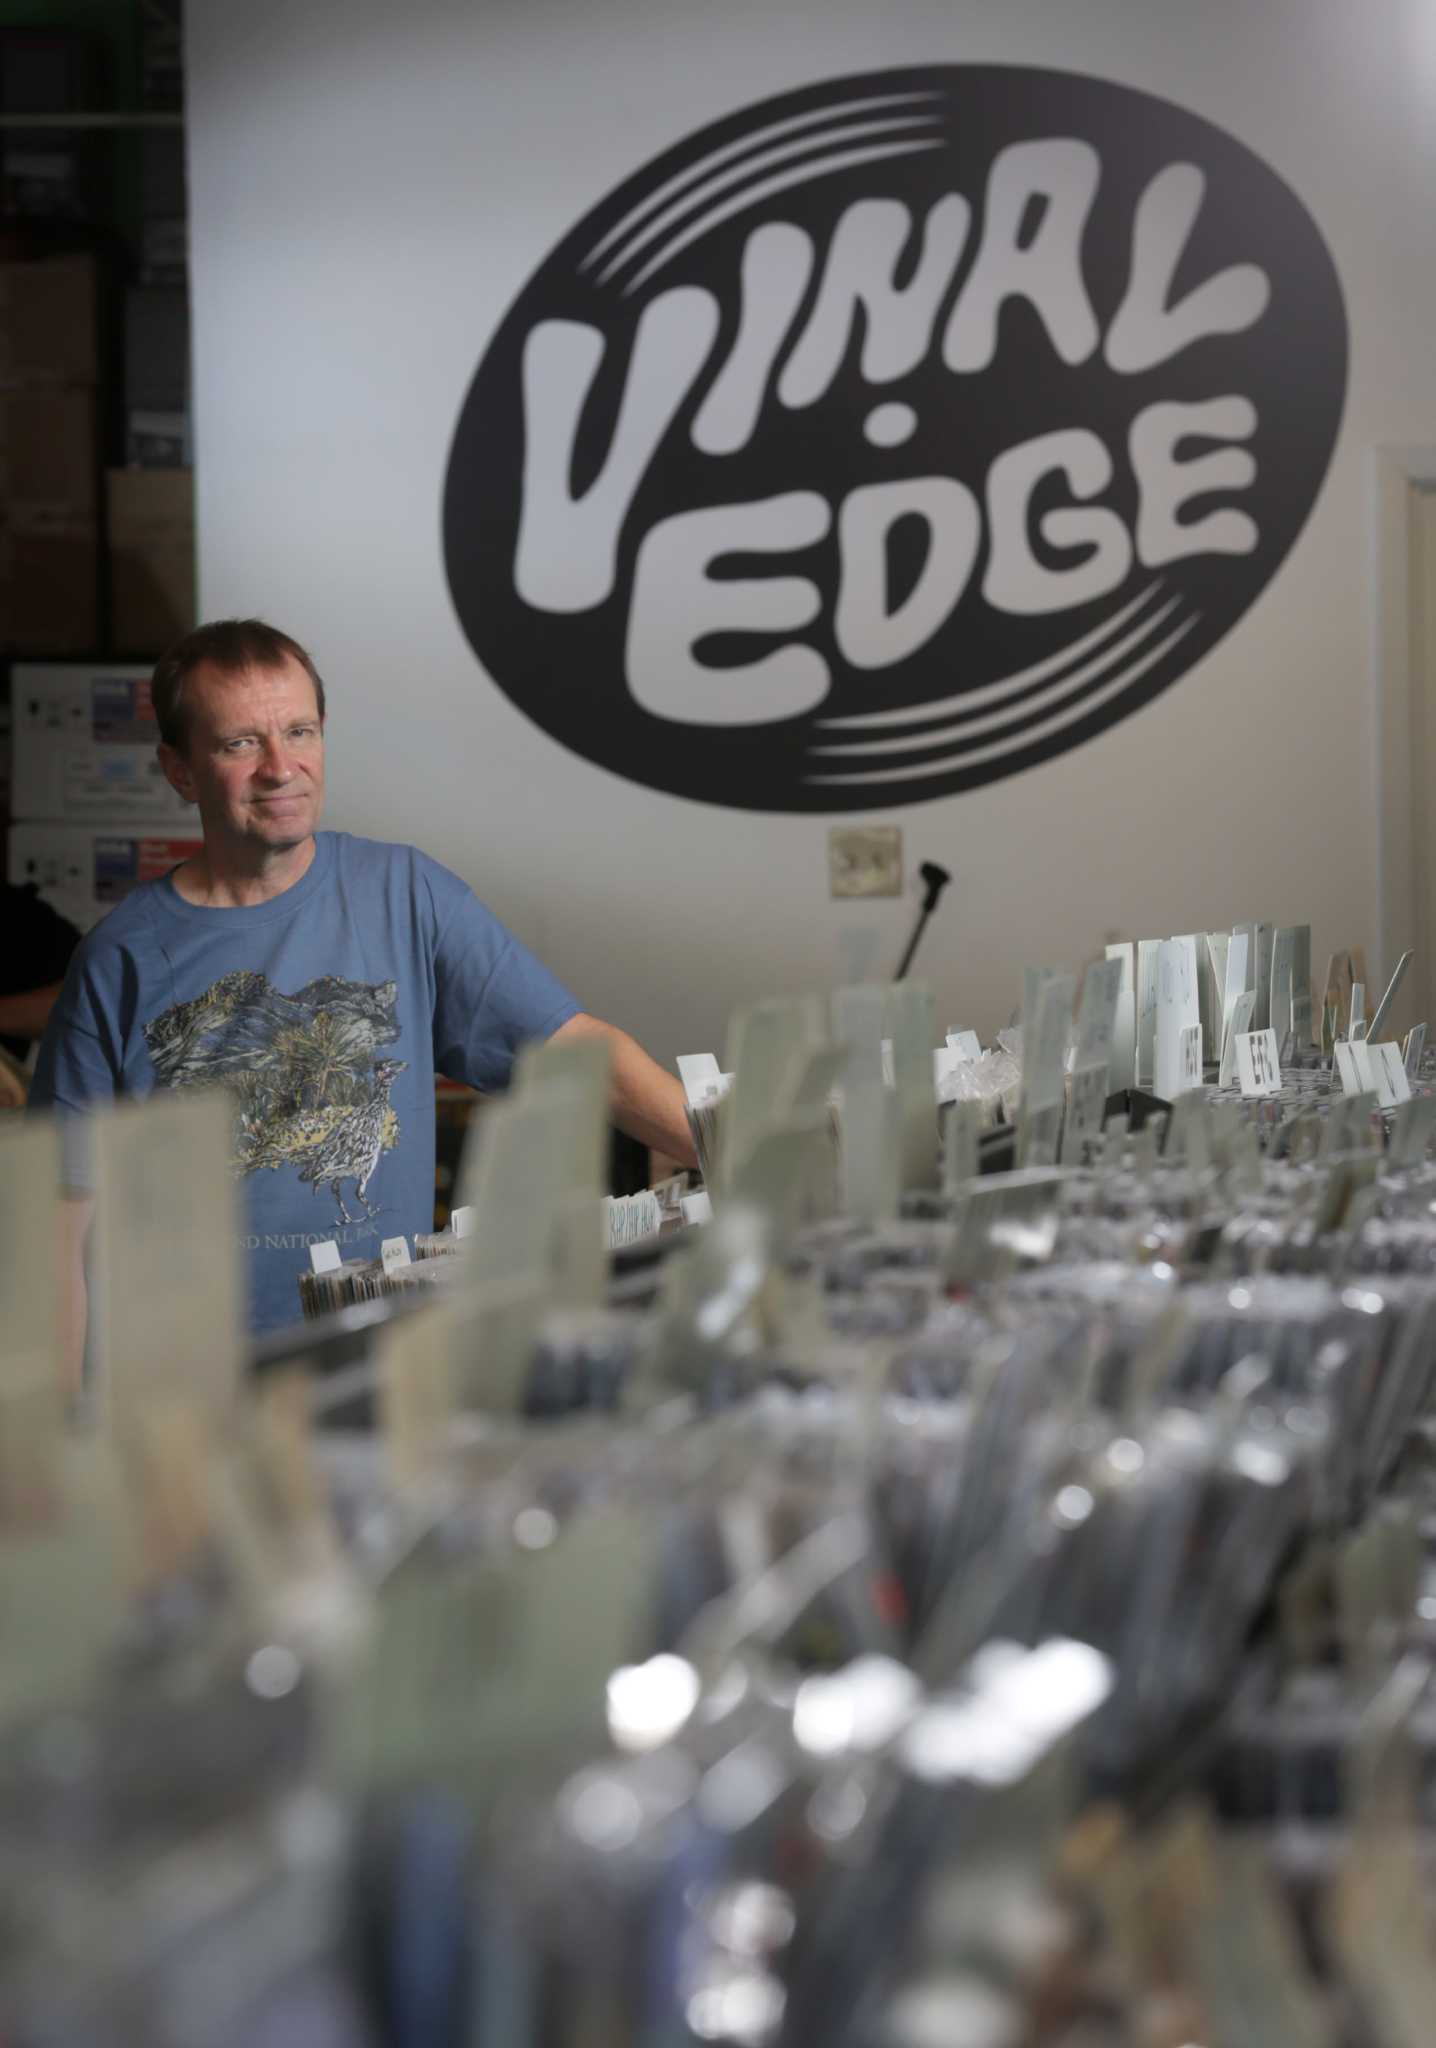 Vinal Edge, one favorite record stores, turns years old this month